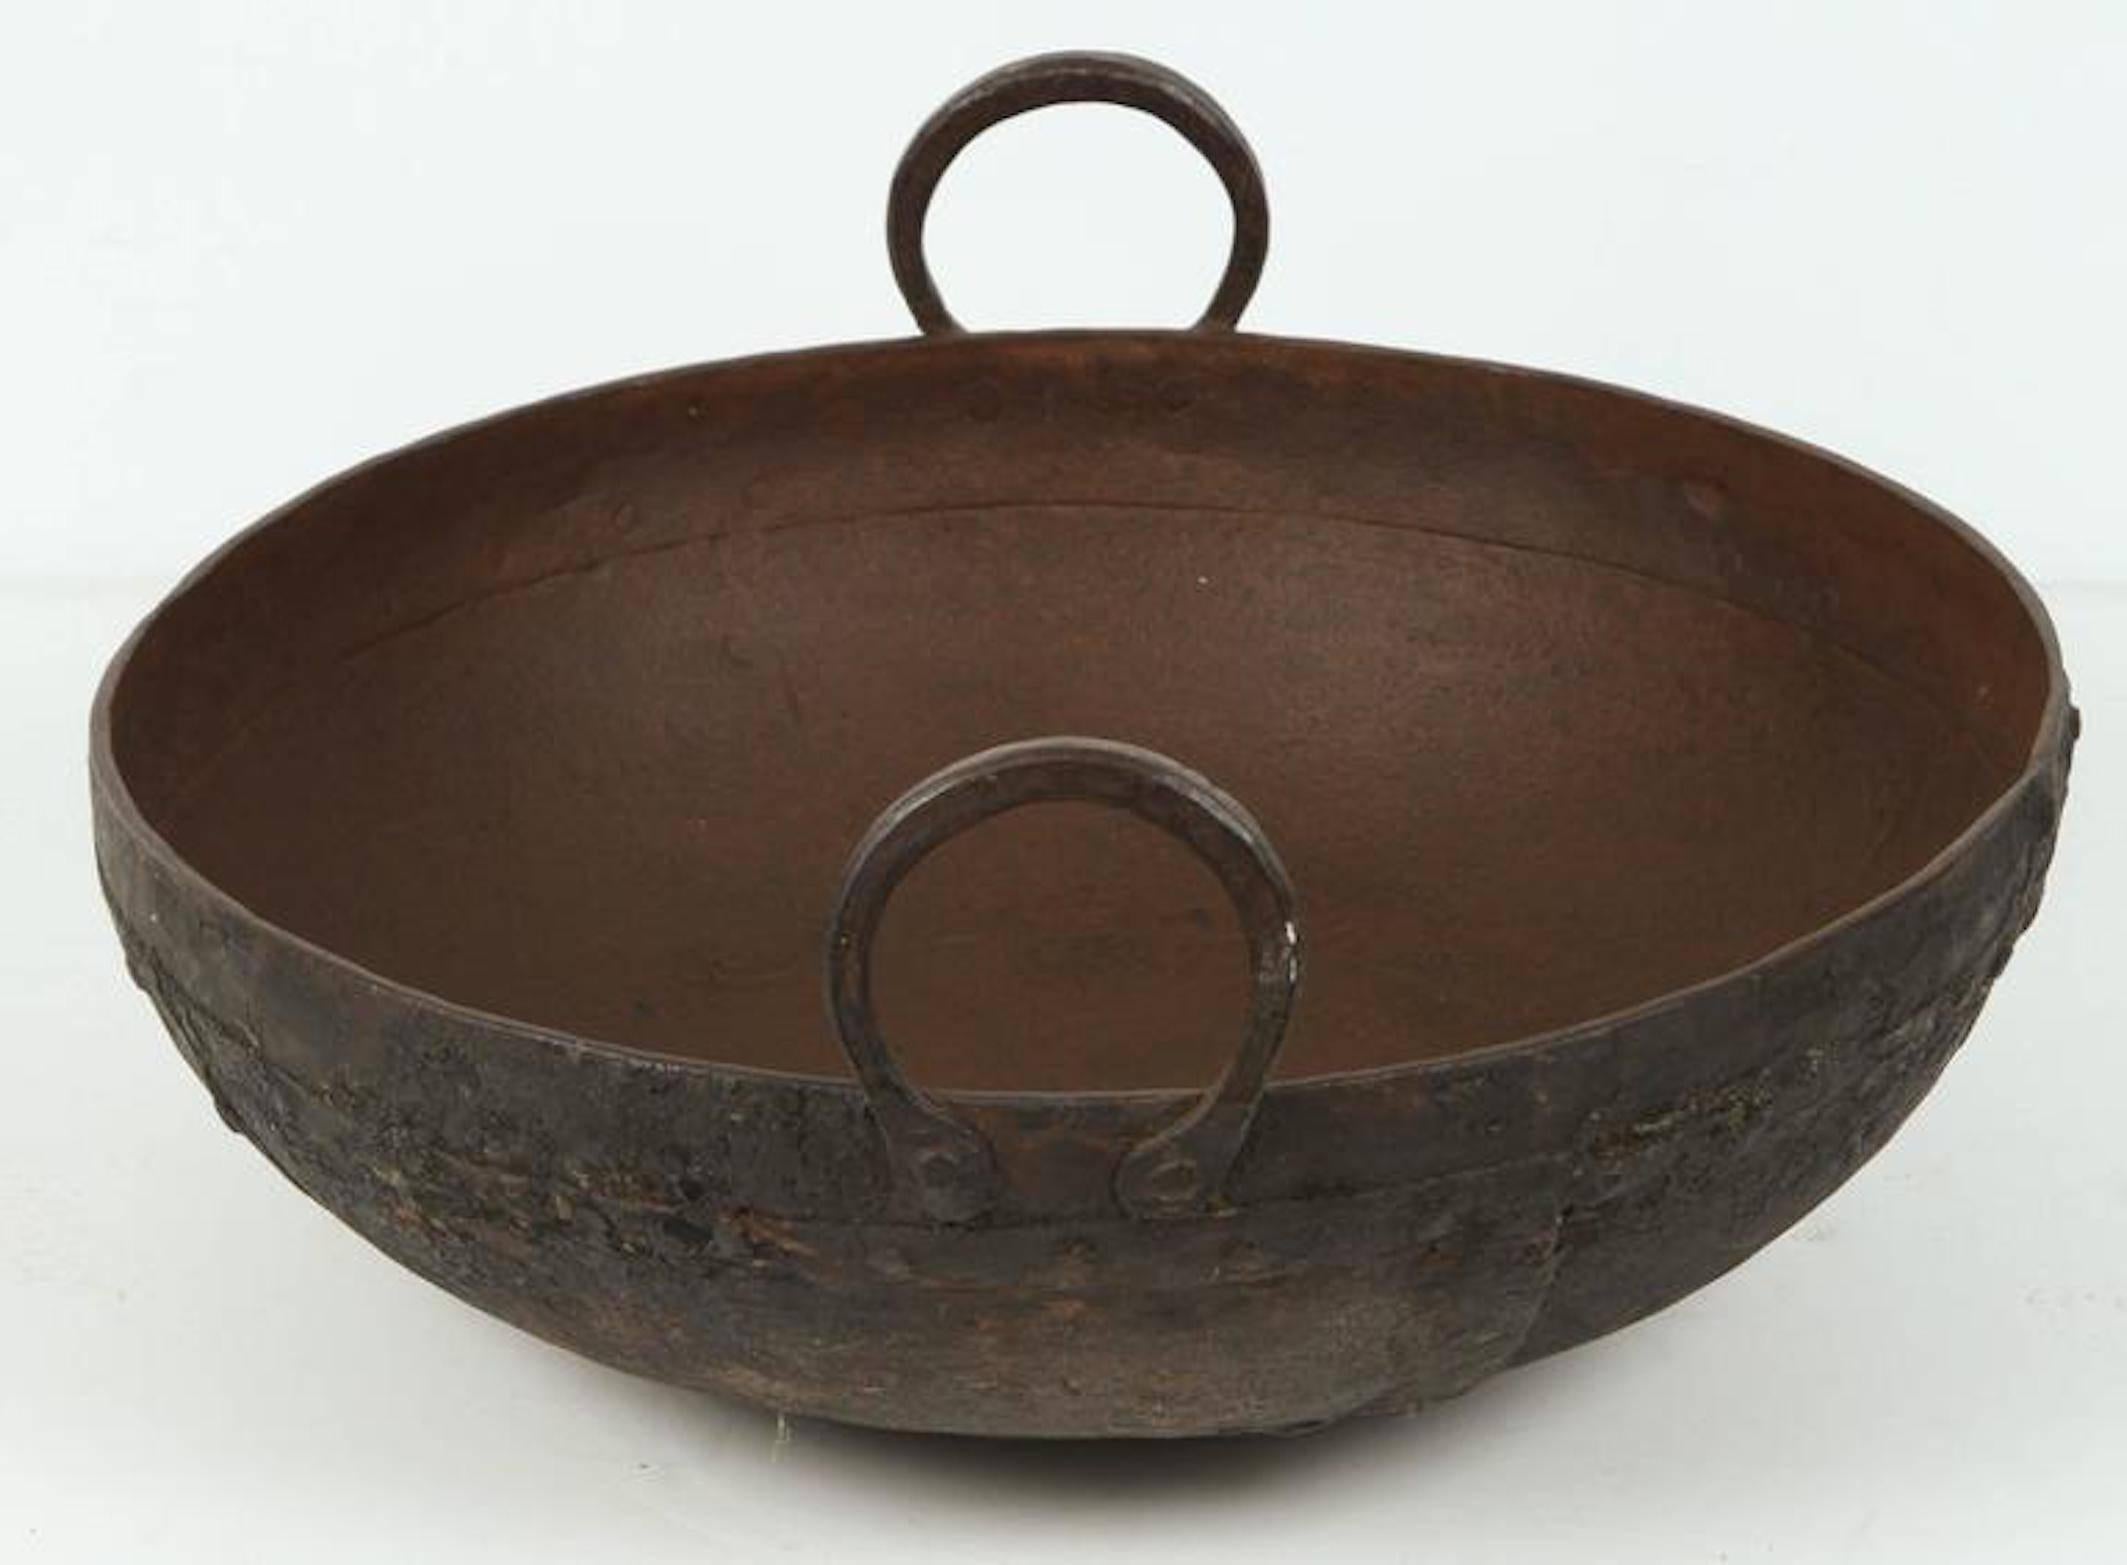 Large metal iron pot from Southern India known locally as an urli. 
These Pots were placed directly on a fire and large meals were prepared for special events. 
They make great garden ponds, jardinières and other outdoor uses. 
Hand-tooled detailing